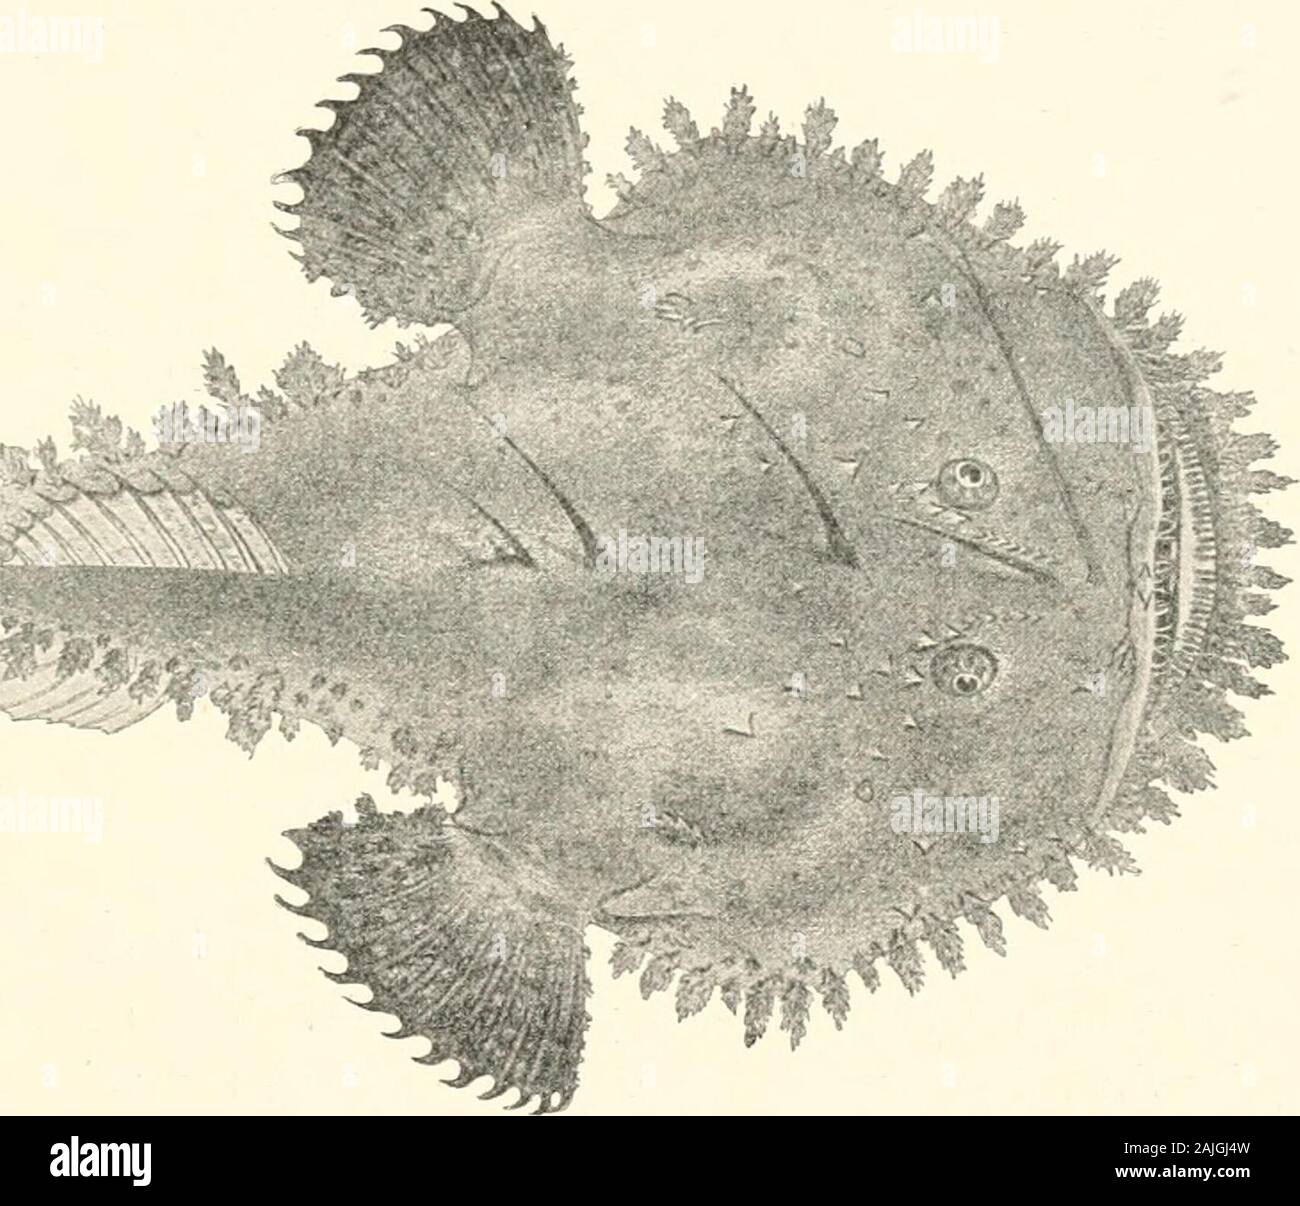 Venoms; venomous animals and antivenomous serum-therapeutics . Fig. 111.—Thalassophryne reticulata (Panama; Tropical Pacific). (After Savtschenko.) The Grunting Batrachus, which does not exceed 30 cm. inlength, is especially common in West Indian waters. When takenfrom the water it makes a peculiar grunting sound, whence its nameis derived. The pectoral fins are reddish, the back is brown, andthe sides are yellow, marbled with black. It has three spines in theanterior dorsal fin, and a fourth spine on the top of the operculum,with a small poison-sac at the base of each. VENOMS IN THE ANIMAL SE Stock Photo